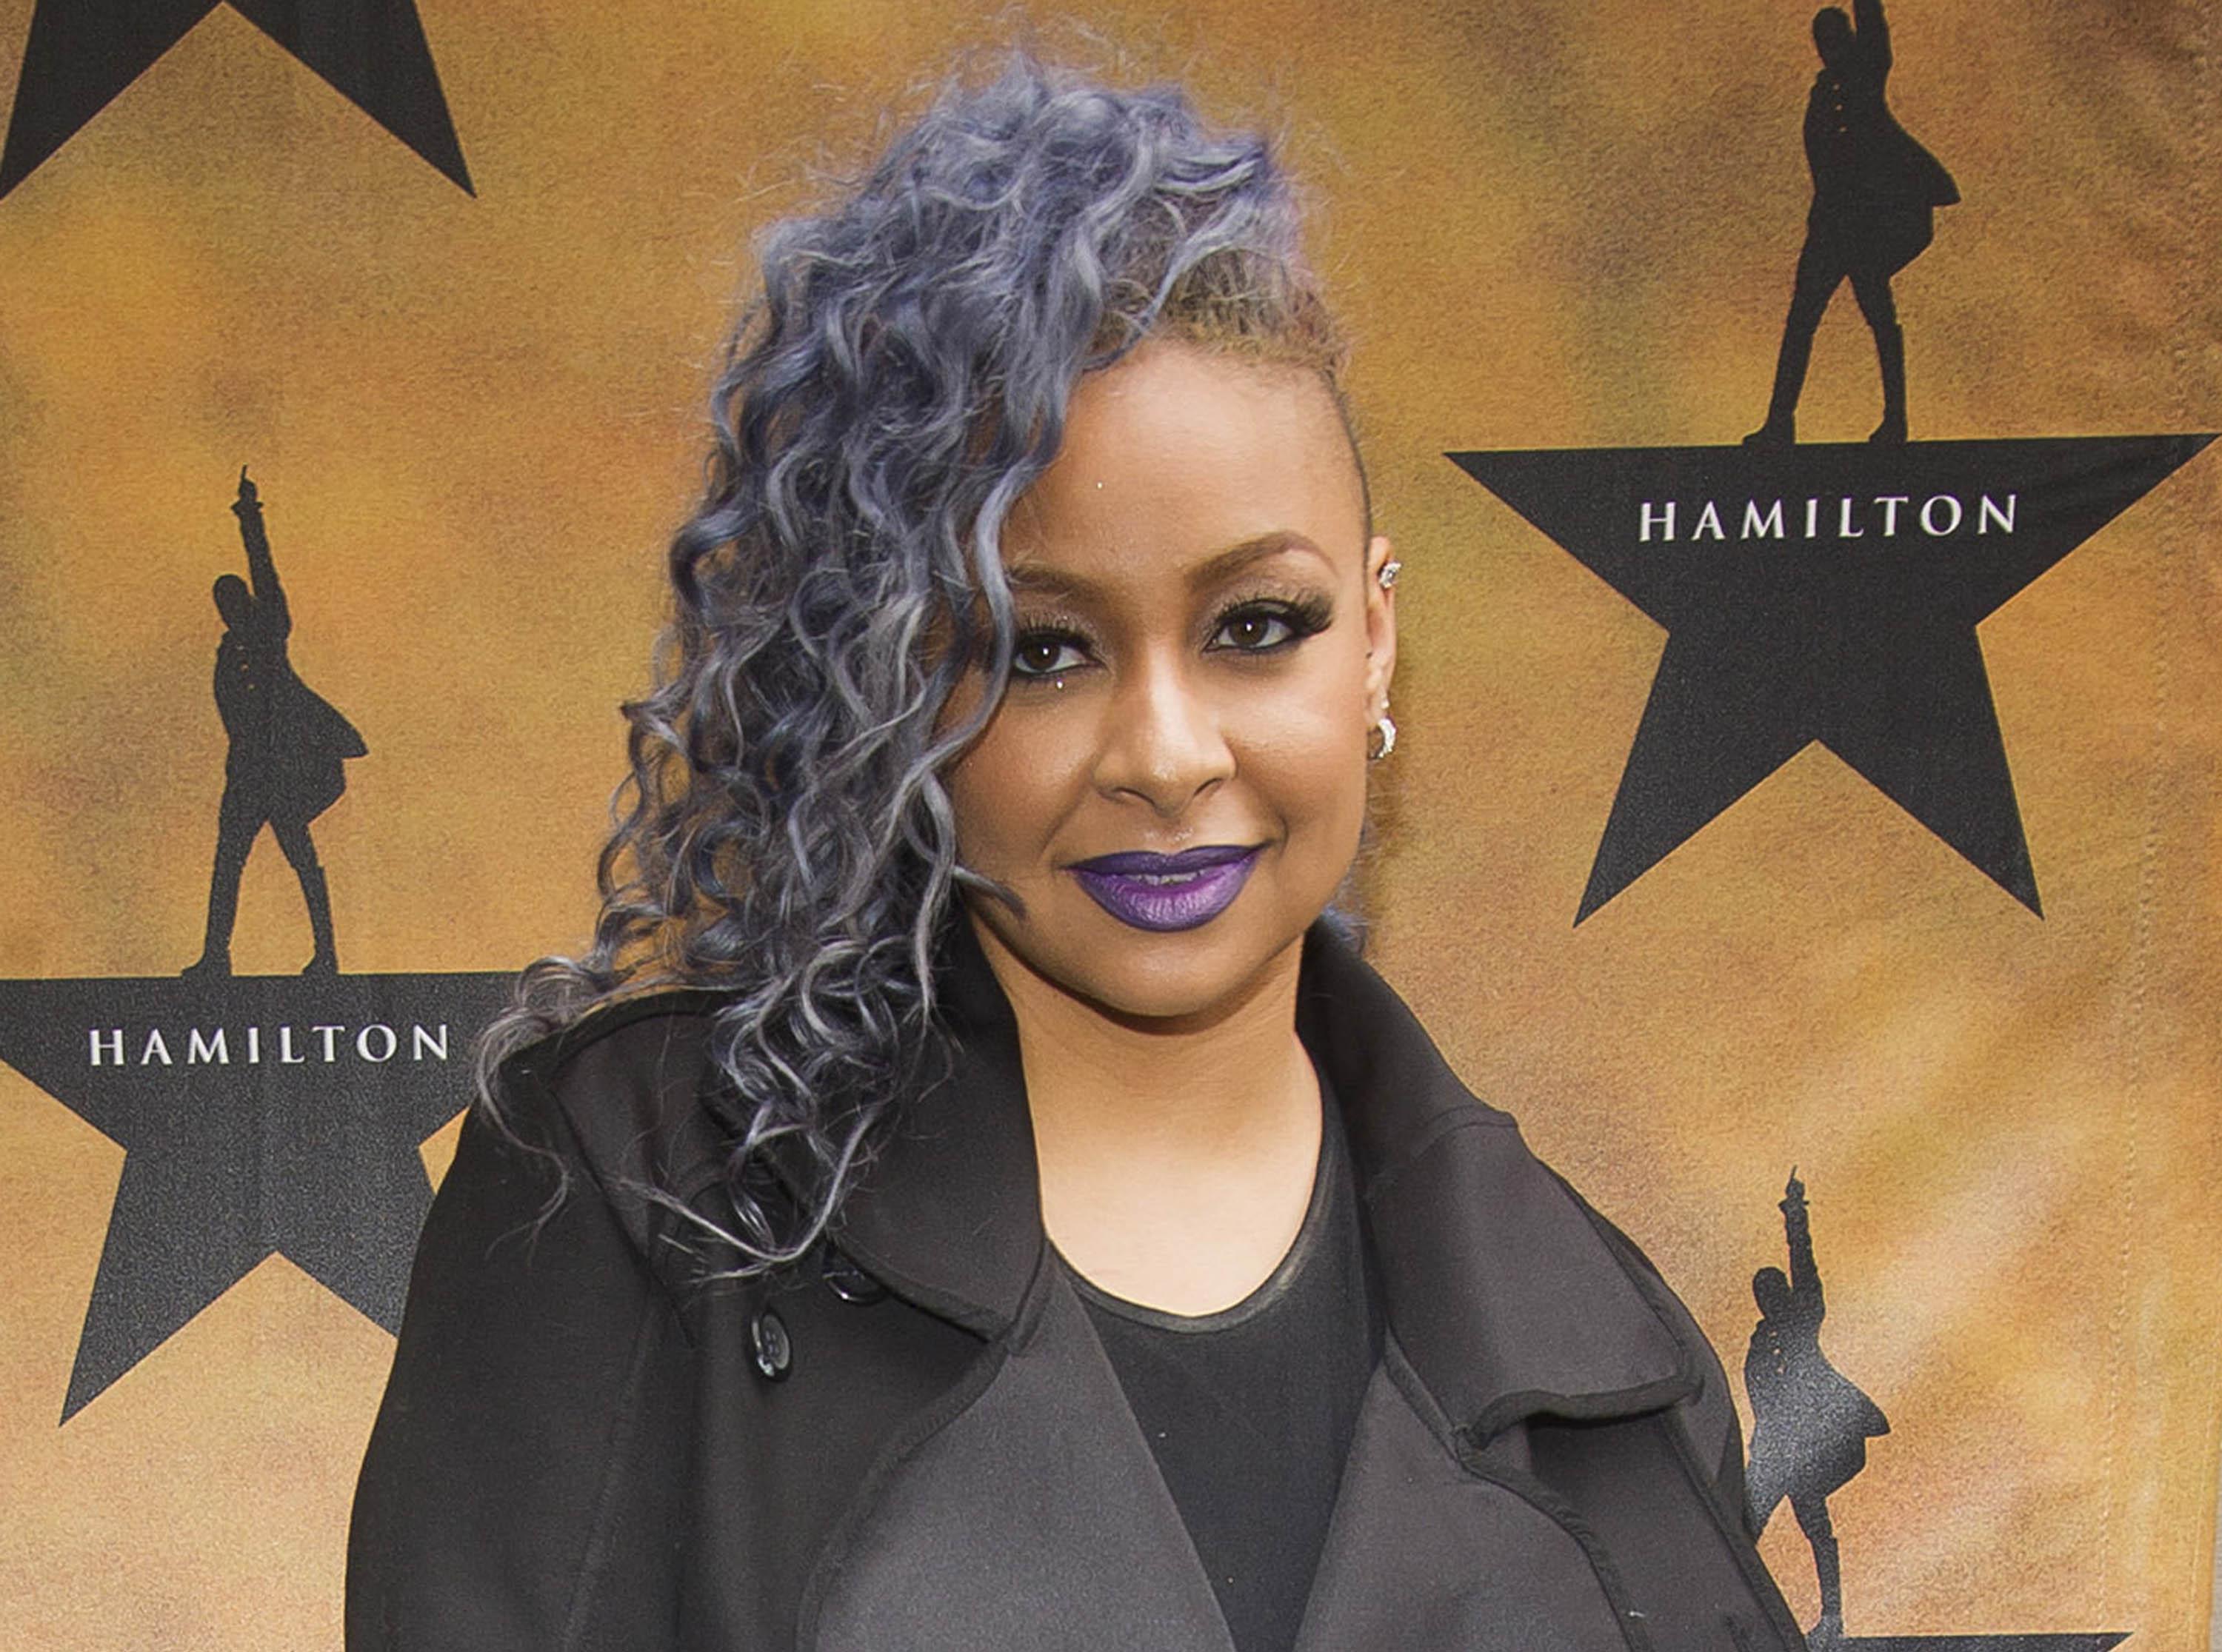 Raven Symone 'going To Move To Canada' If GOP Candidate Is